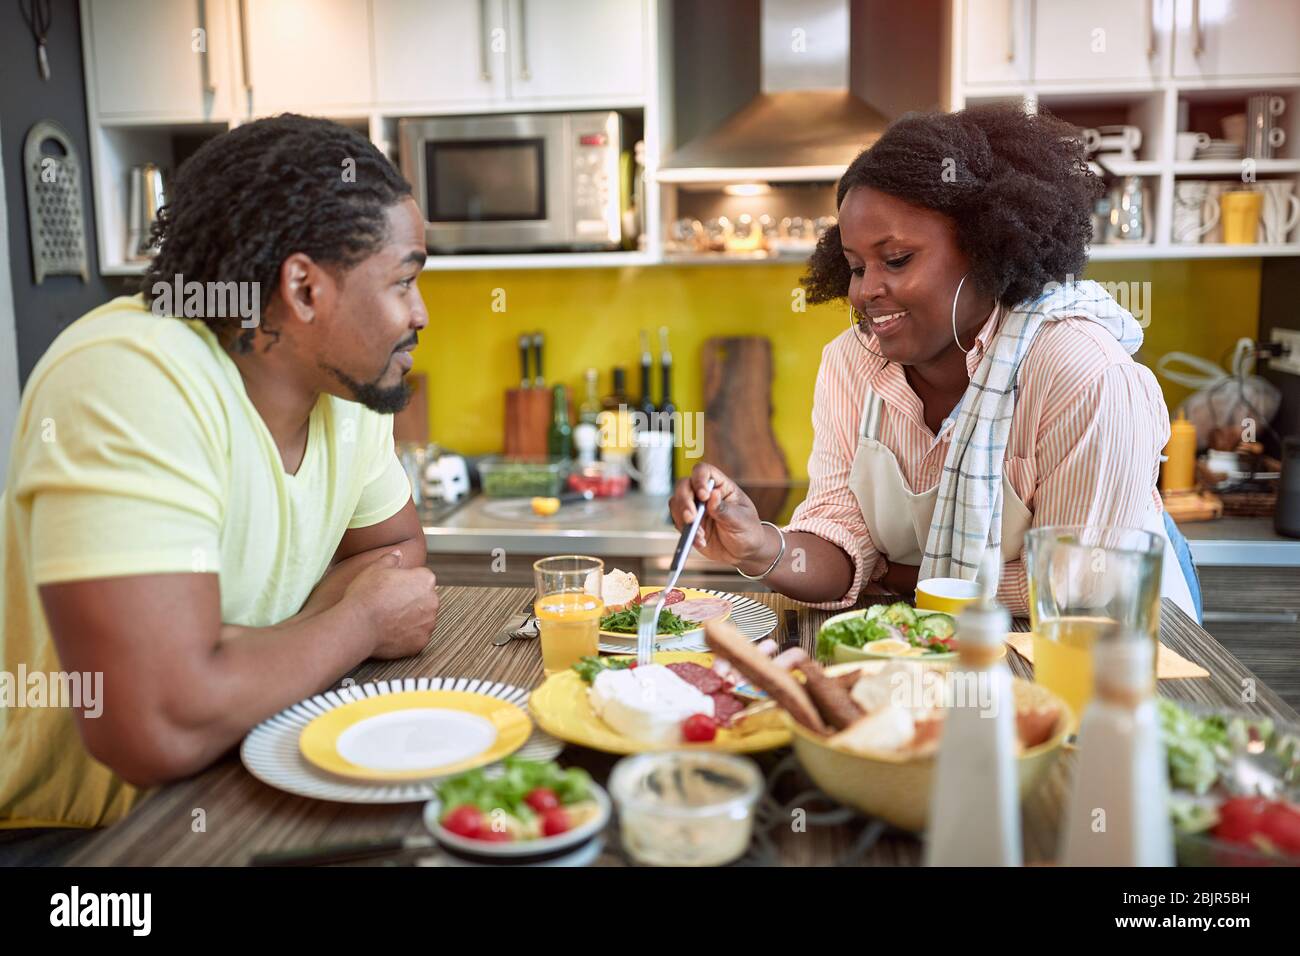 young afro-american couple enjoying breakfast together. togetherness, joy, talk, sharing meal Stock Photo